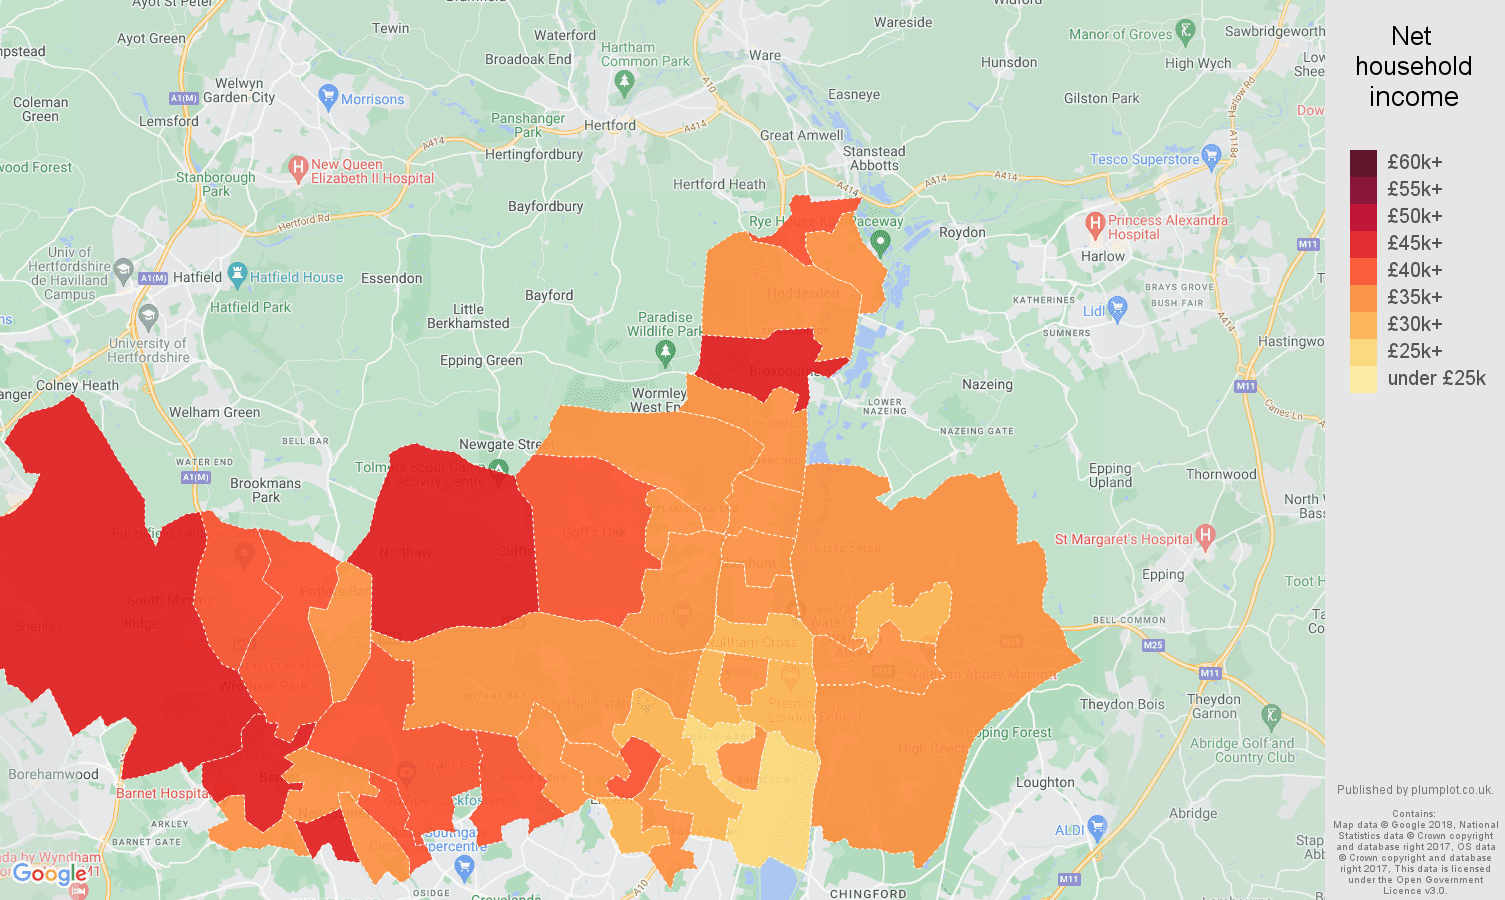 Enfield net household income map